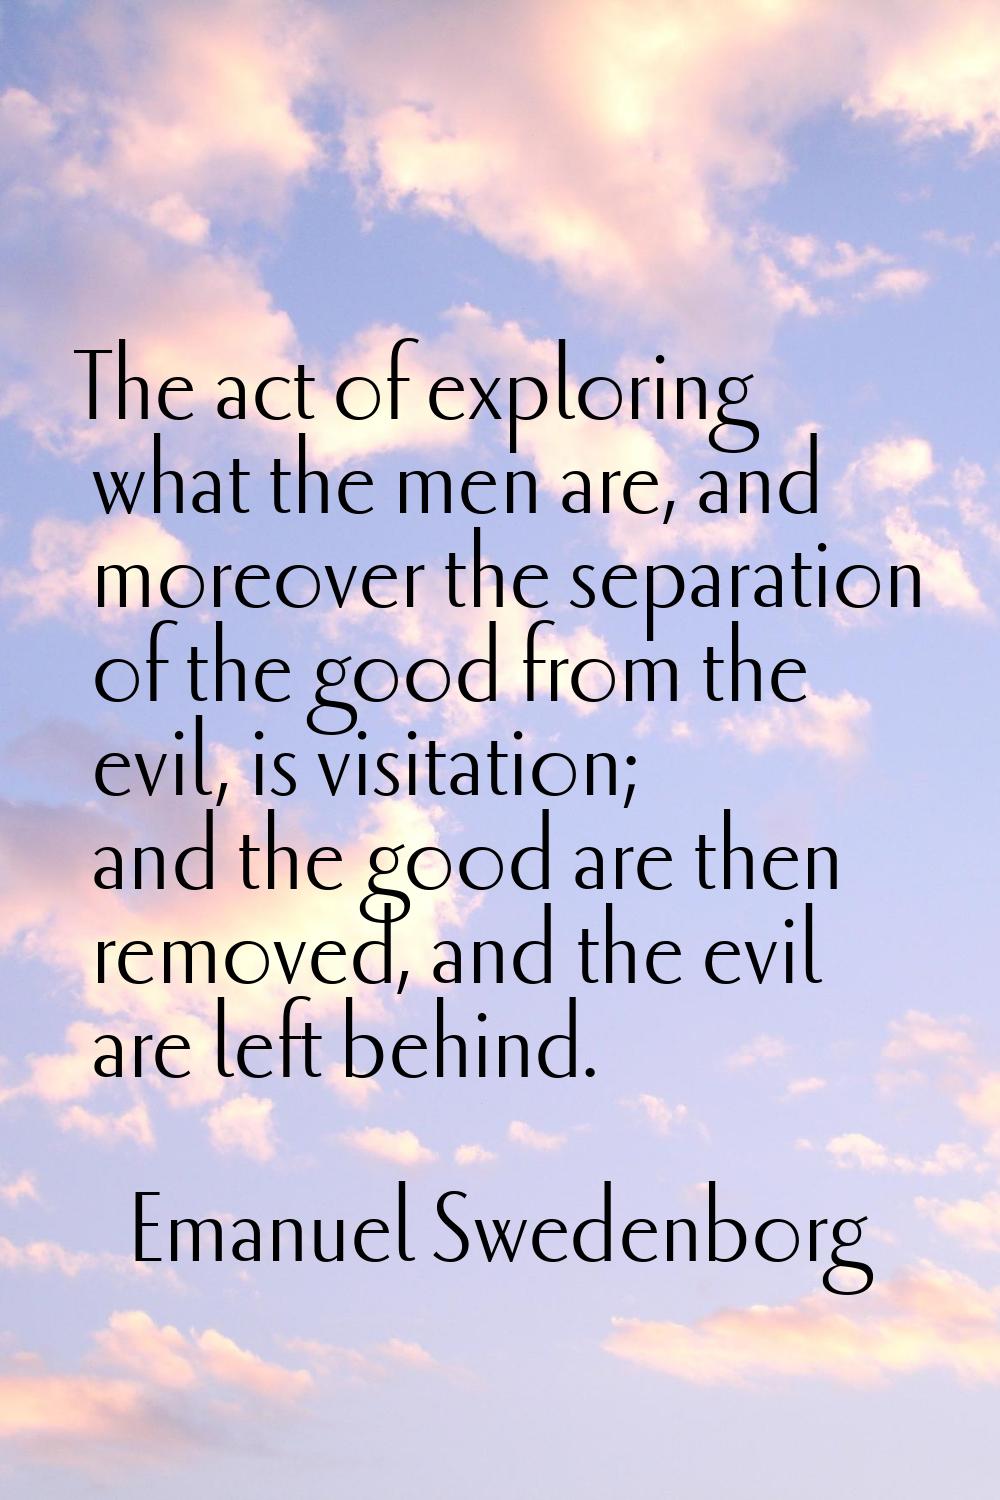 The act of exploring what the men are, and moreover the separation of the good from the evil, is vi